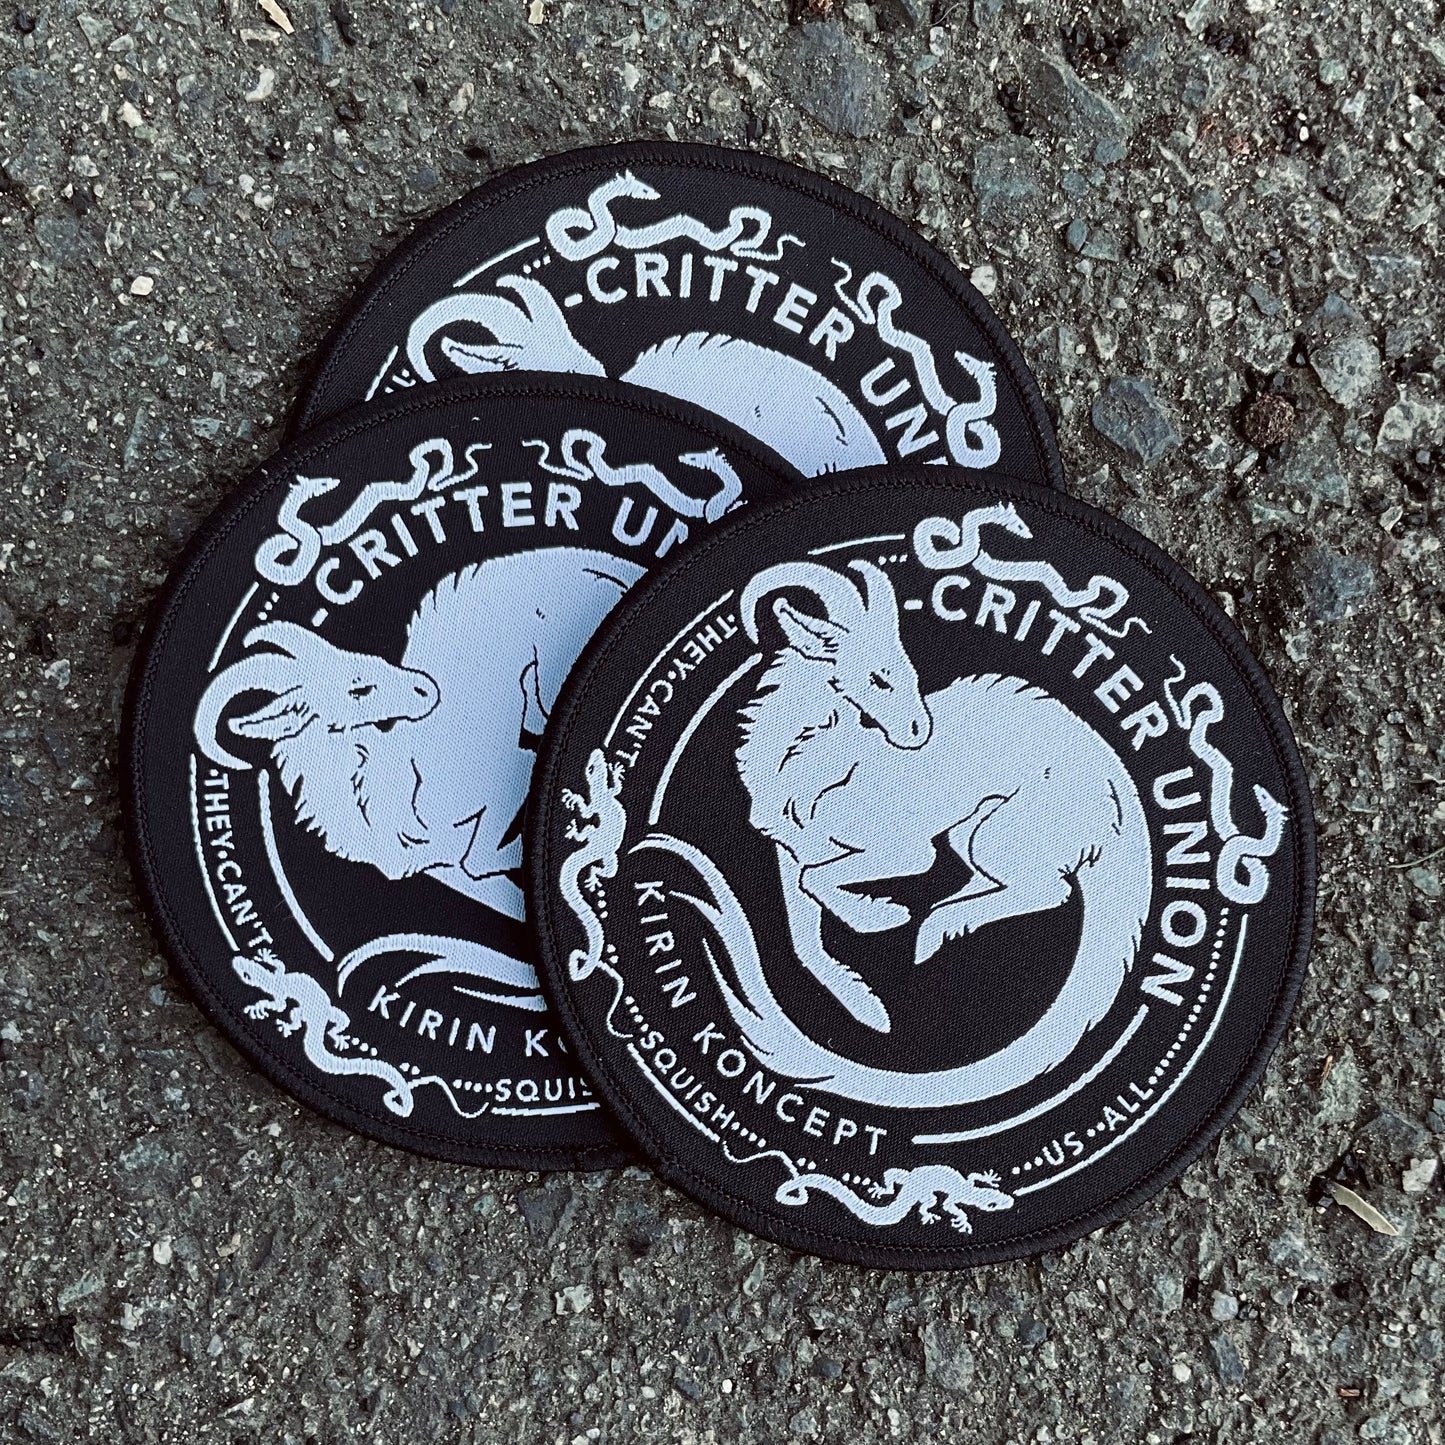 Black embroidered woven critter union patch